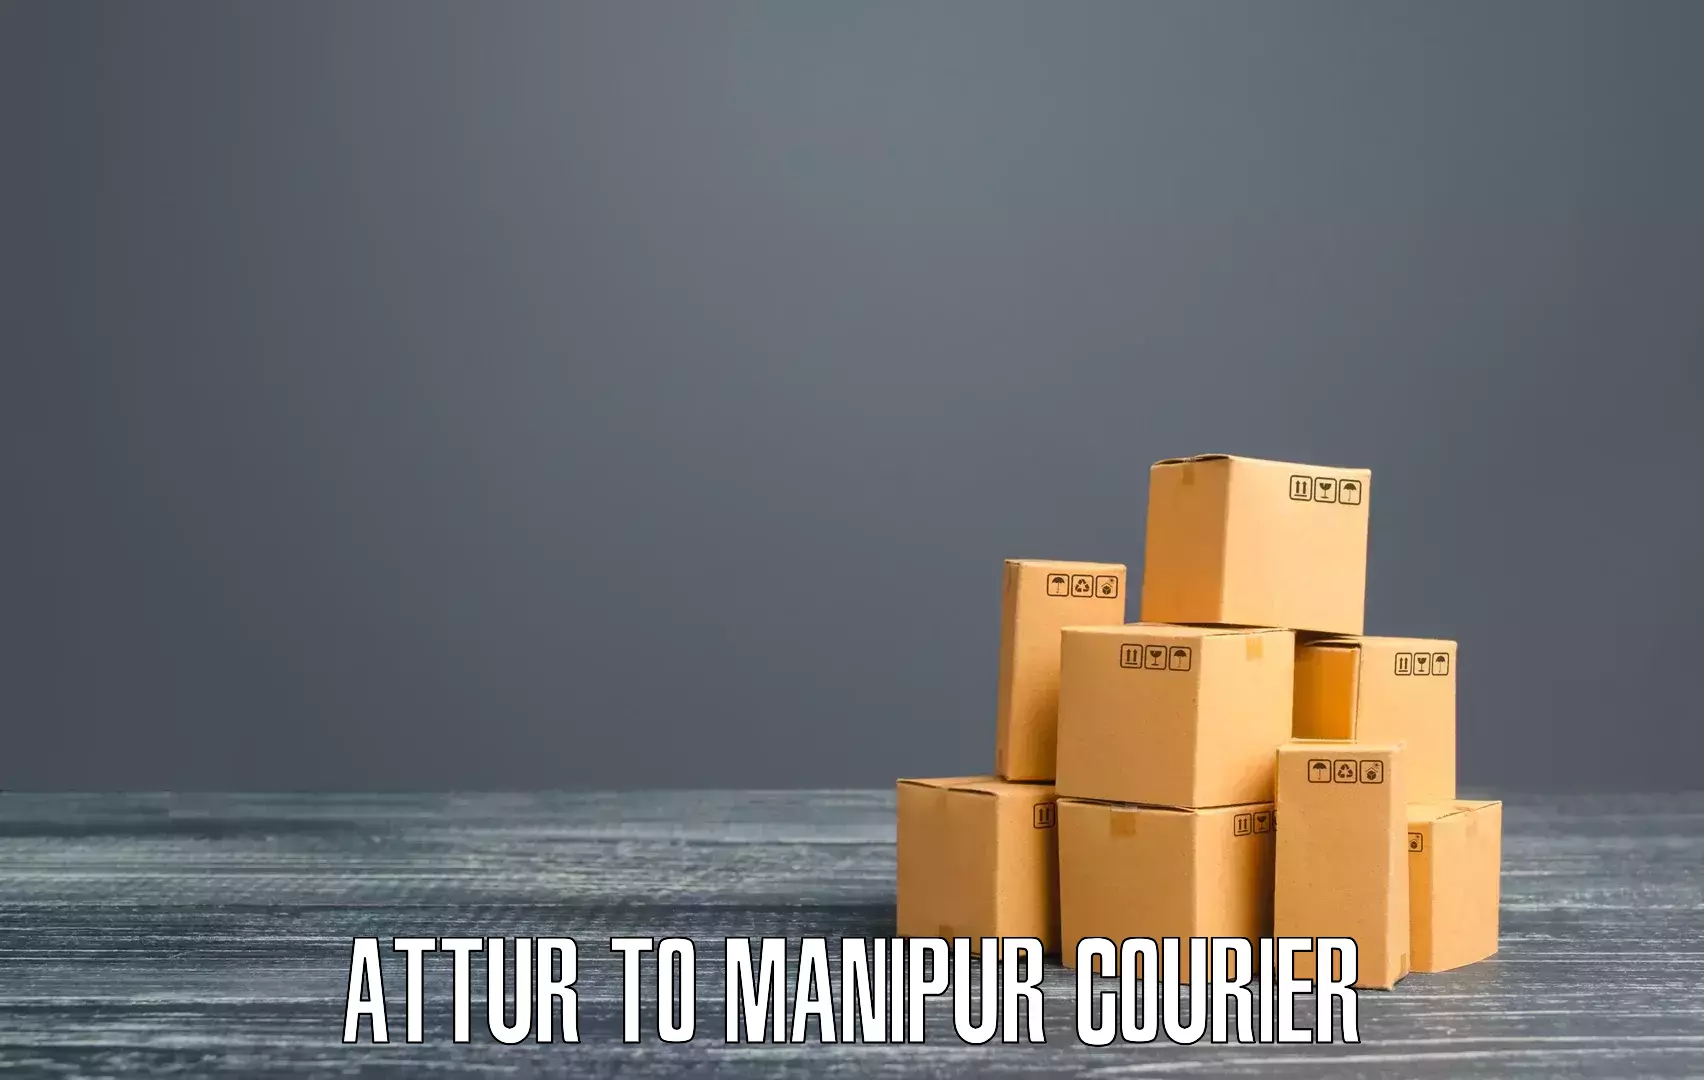 Nationwide courier service Attur to Moirang